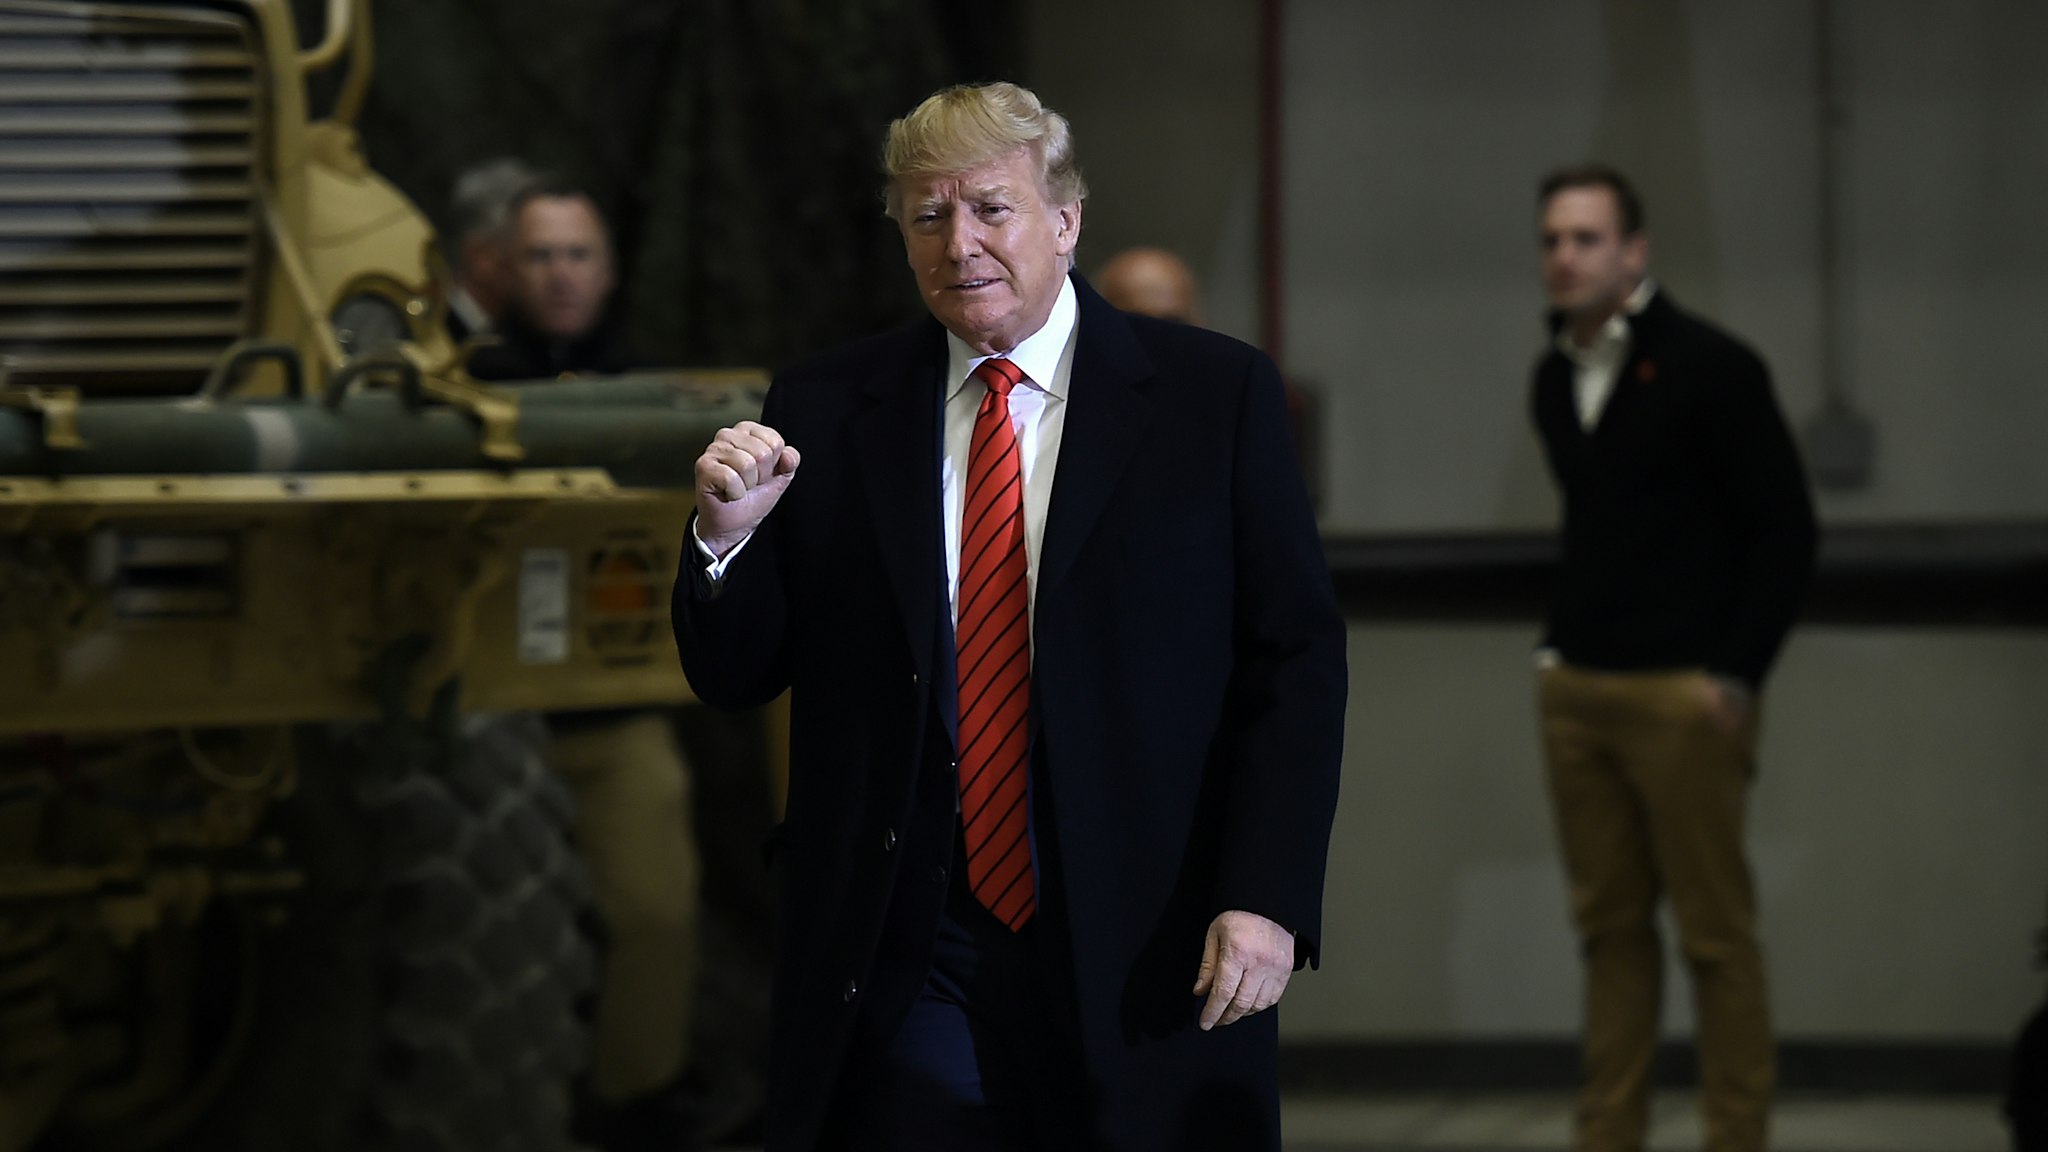 US President Donald Trump gestures as he arrives to speak to the US soldiers during a surprise Thanksgiving day visit at Bagram Air Field, on November 28, 2019 in Afghanistan. (Photo by Olivier Douliery / AFP) (Photo by OLIVIER DOULIERY/AFP via Getty Images)